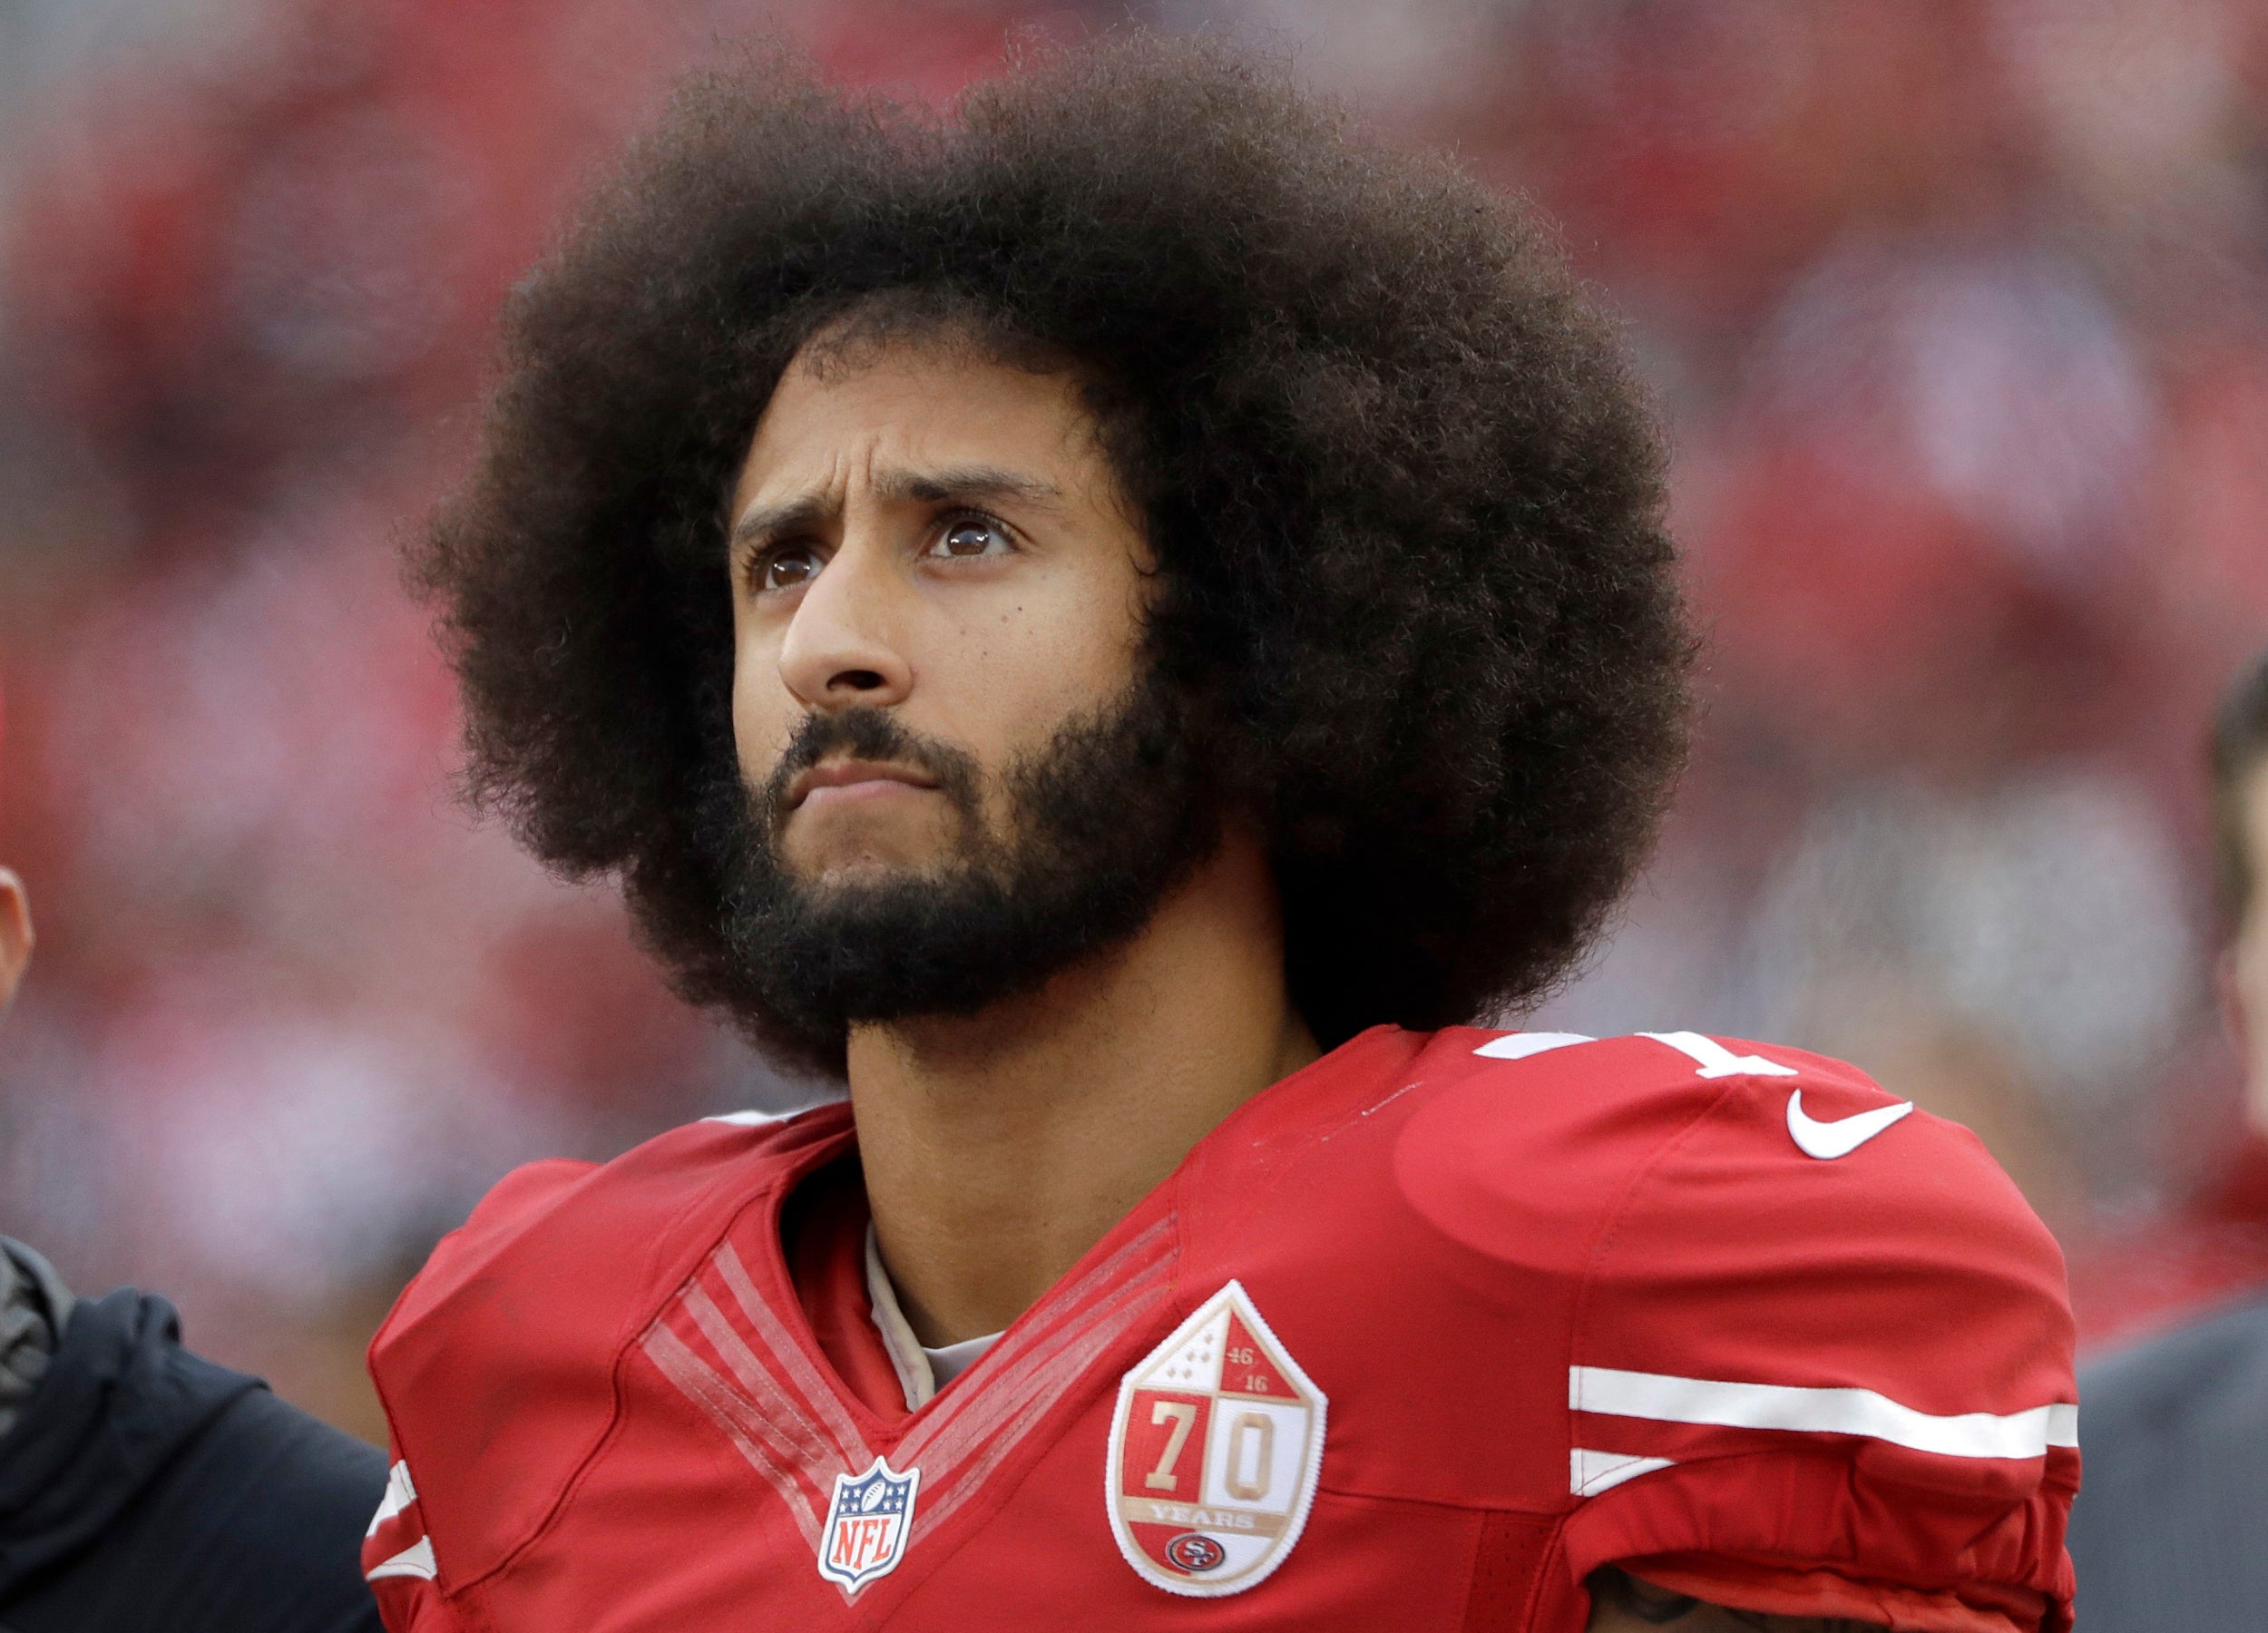 Kaepernick's protests began the anthem protests, he is now suing the NFL for collusion